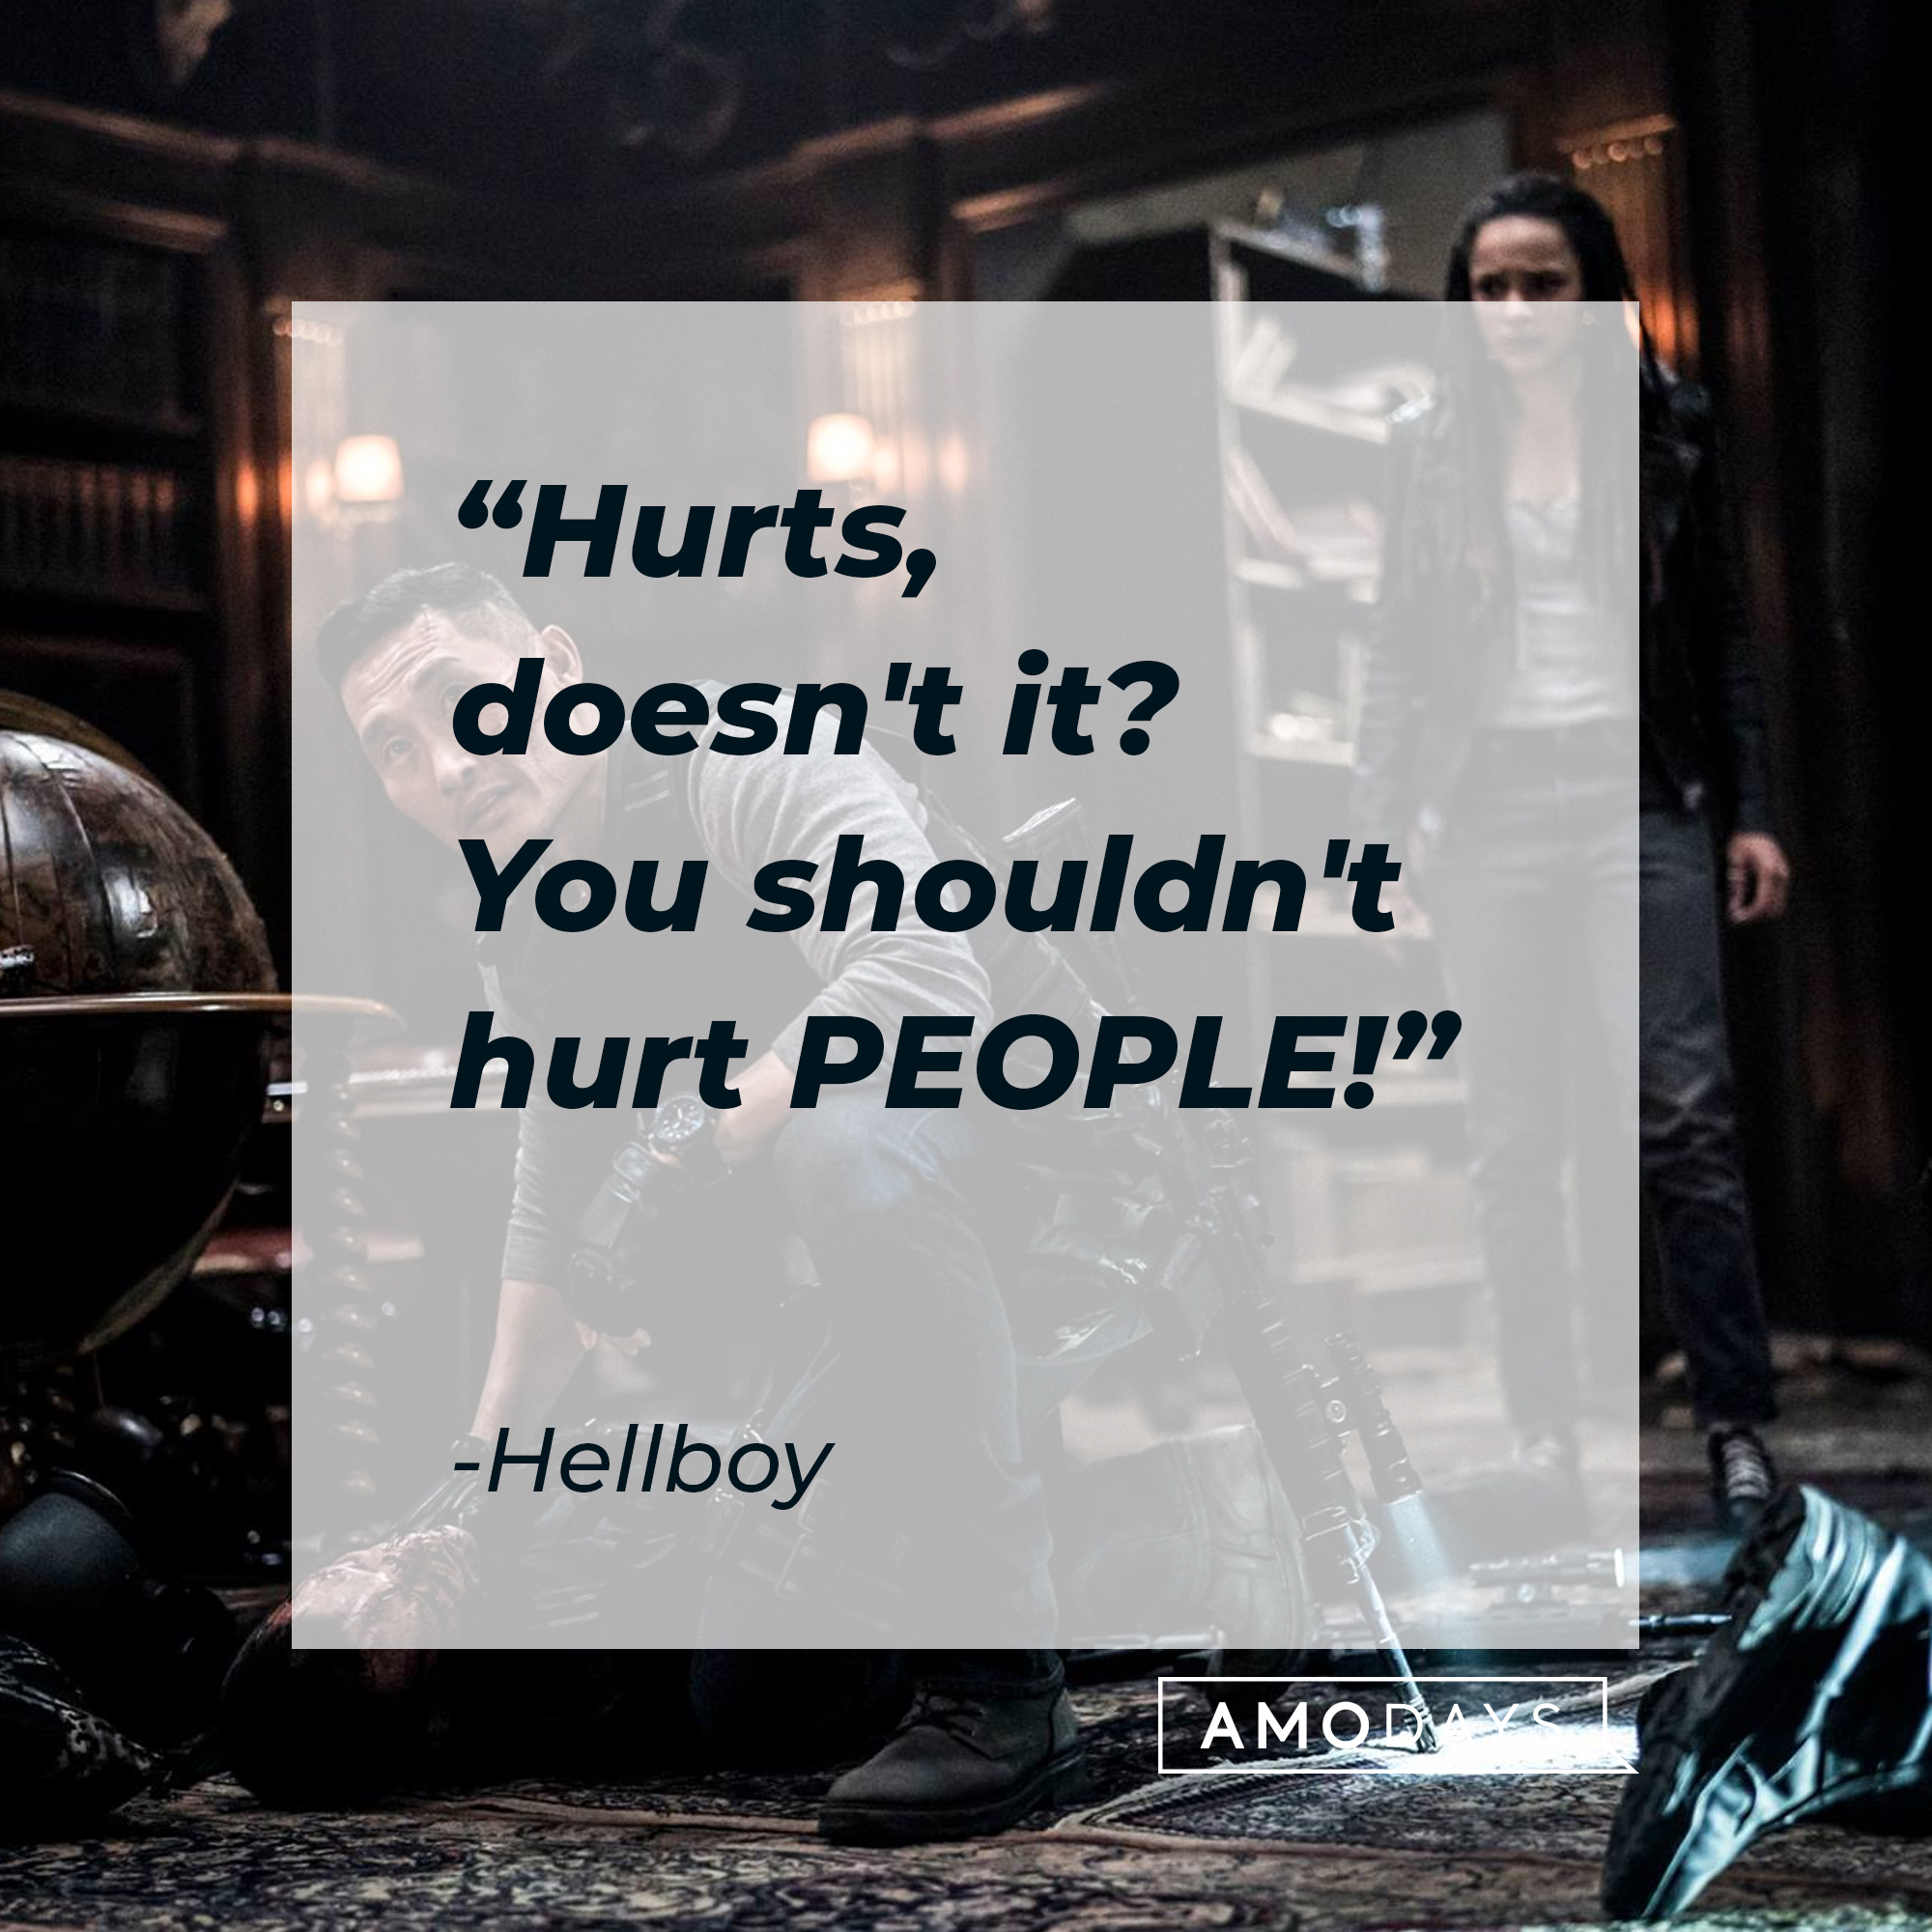 Hellboy's quote: "Hurts, doesn't it? You shouldn't hurt PEOPLE!" | Source: facebook.com/hellboymovie